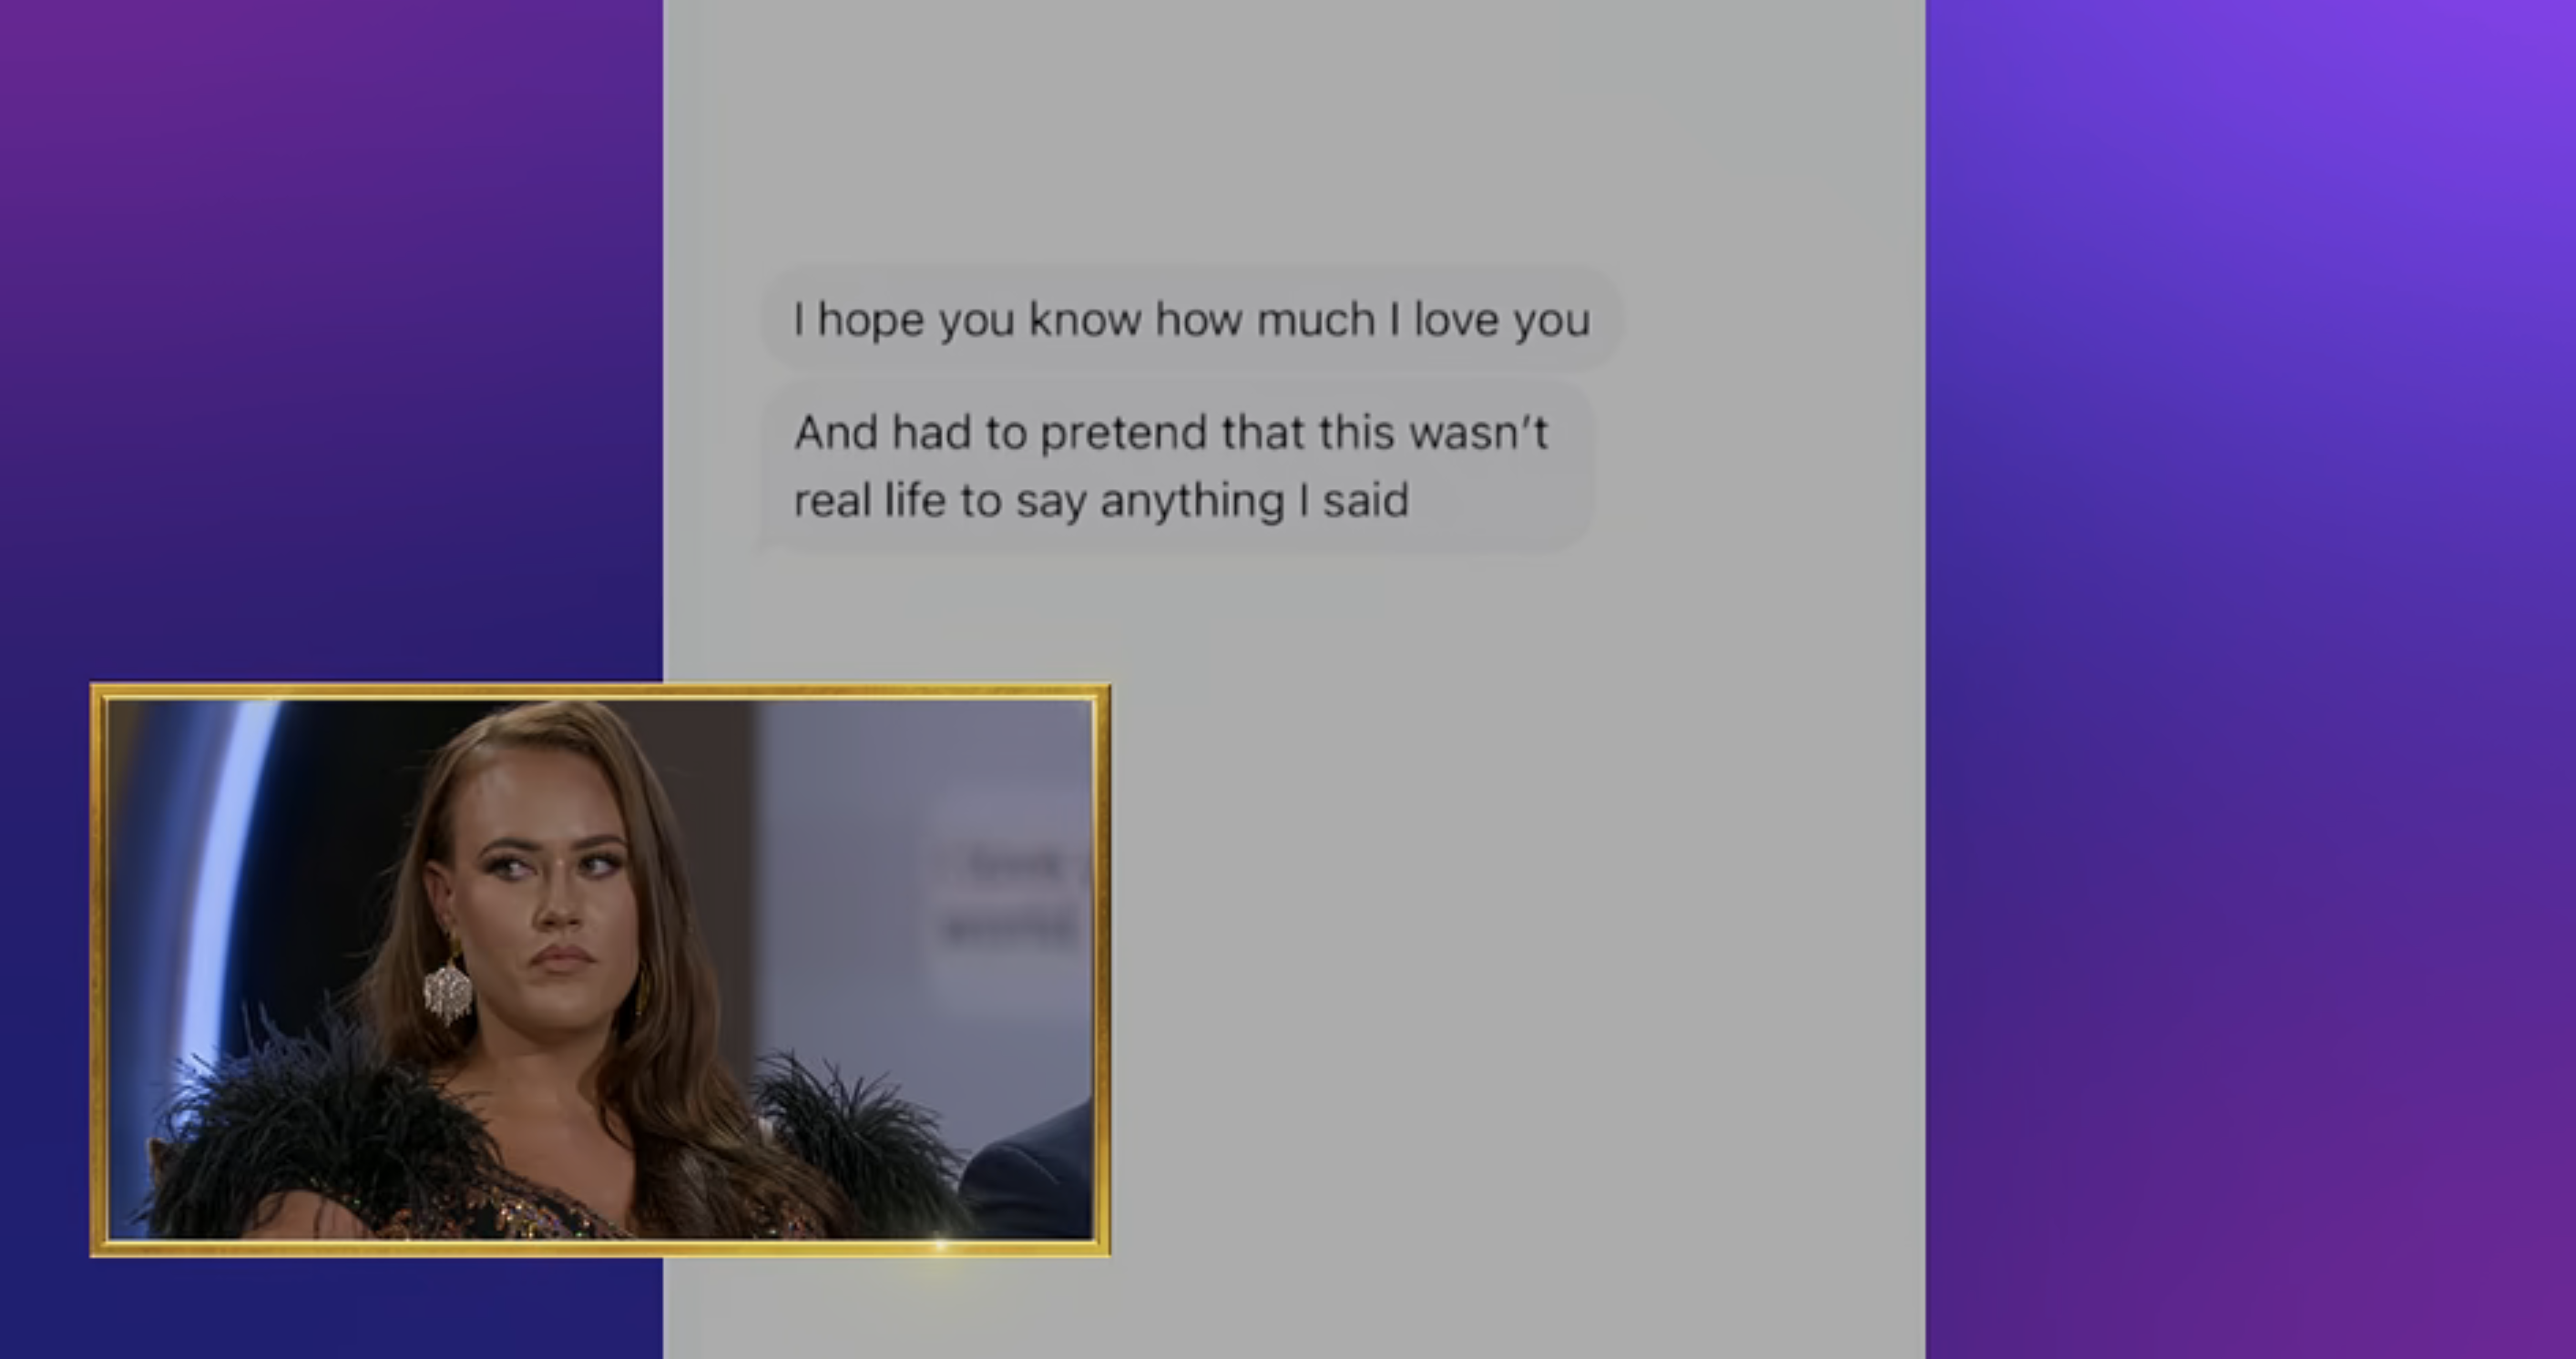 Chelsea sitting with text overlay from a video confessional, expressing affection and pretense